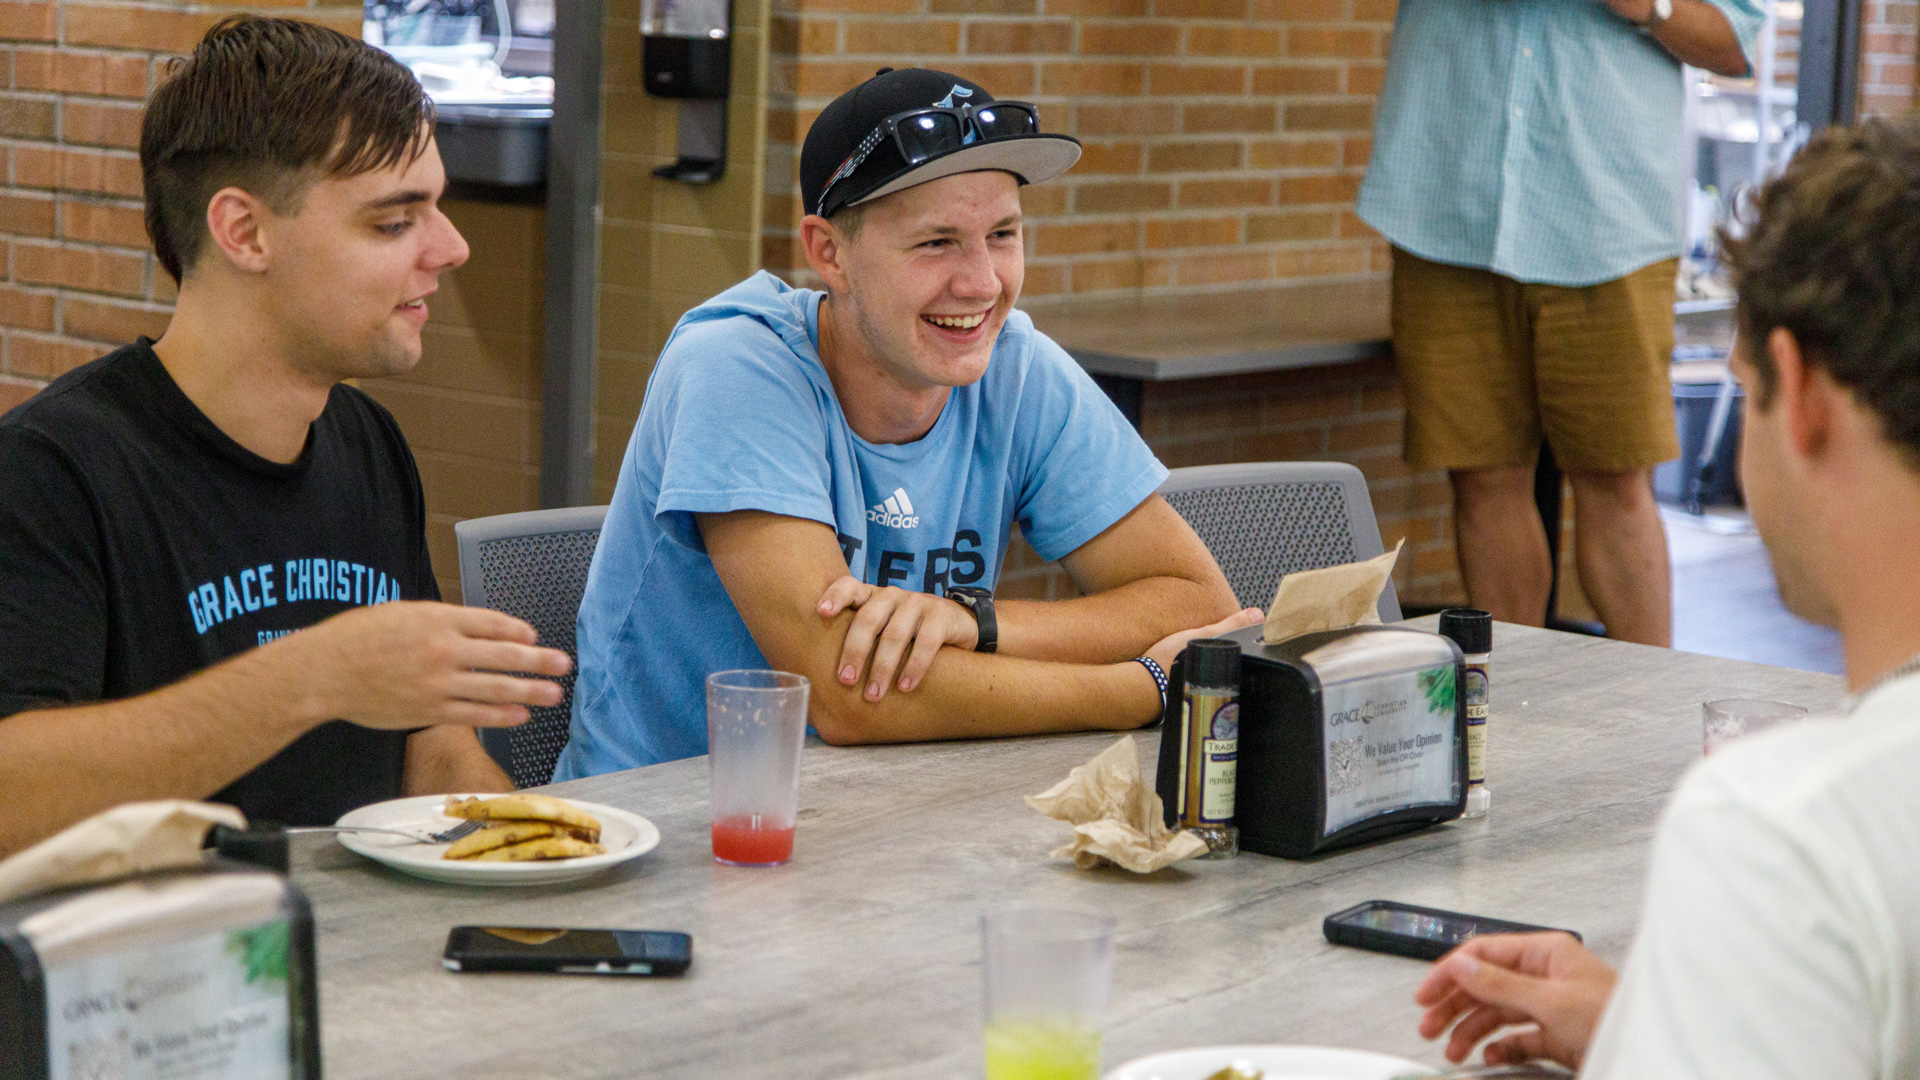 Grace students sitting at tables in the Dining Hall.